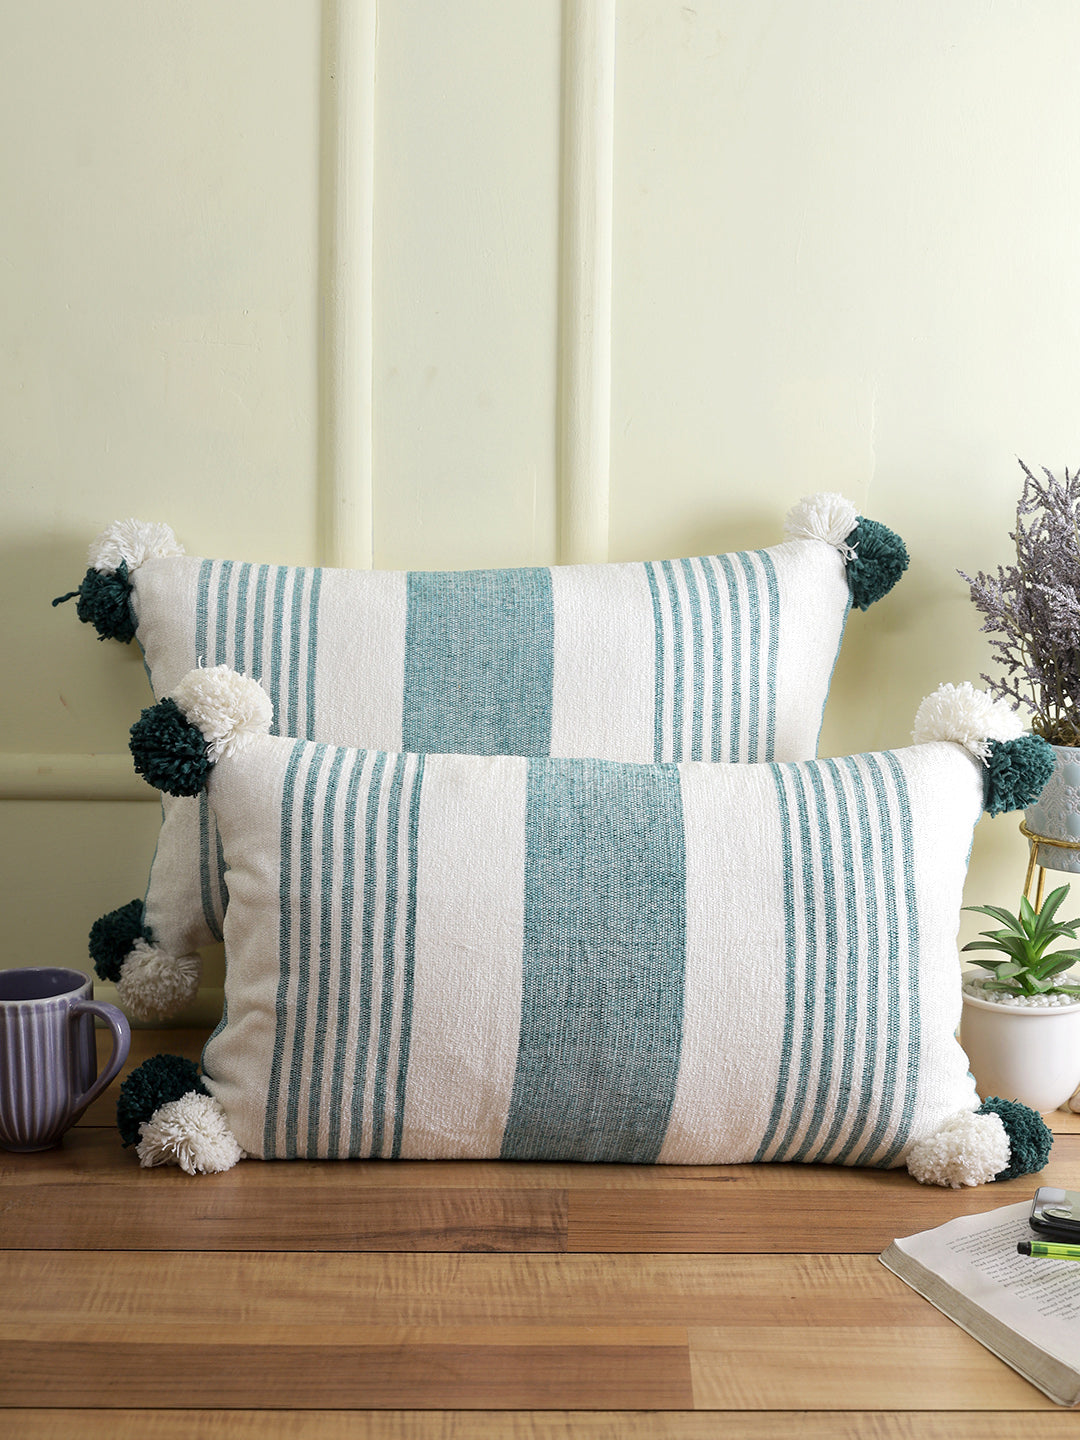 Decorative White and Teal Striped Set of 2 Cushion Cover